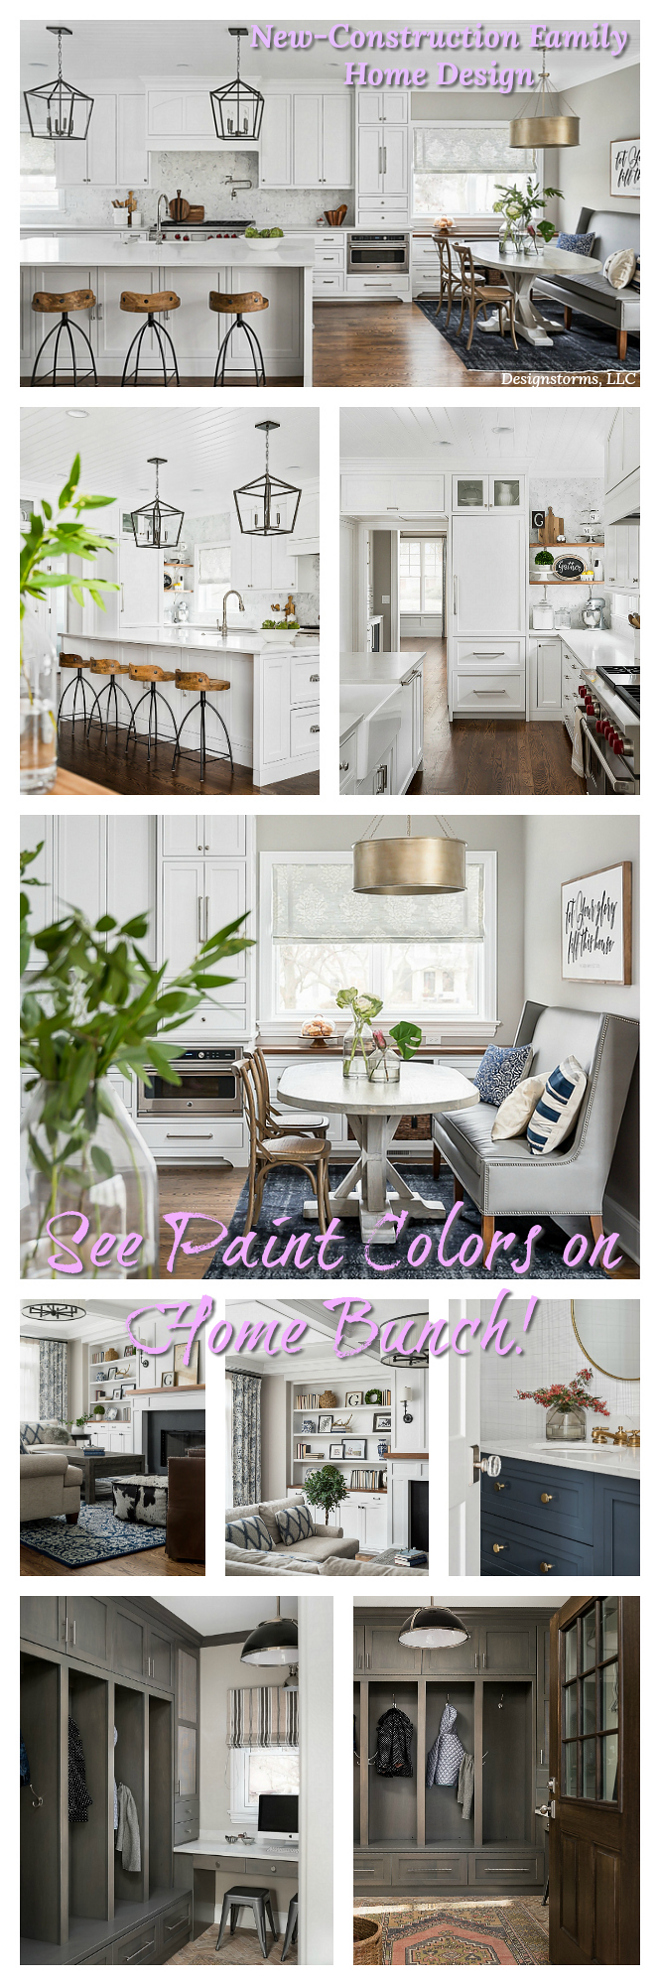 New-Construction Family Home Design Paint Colors on Home Bunch